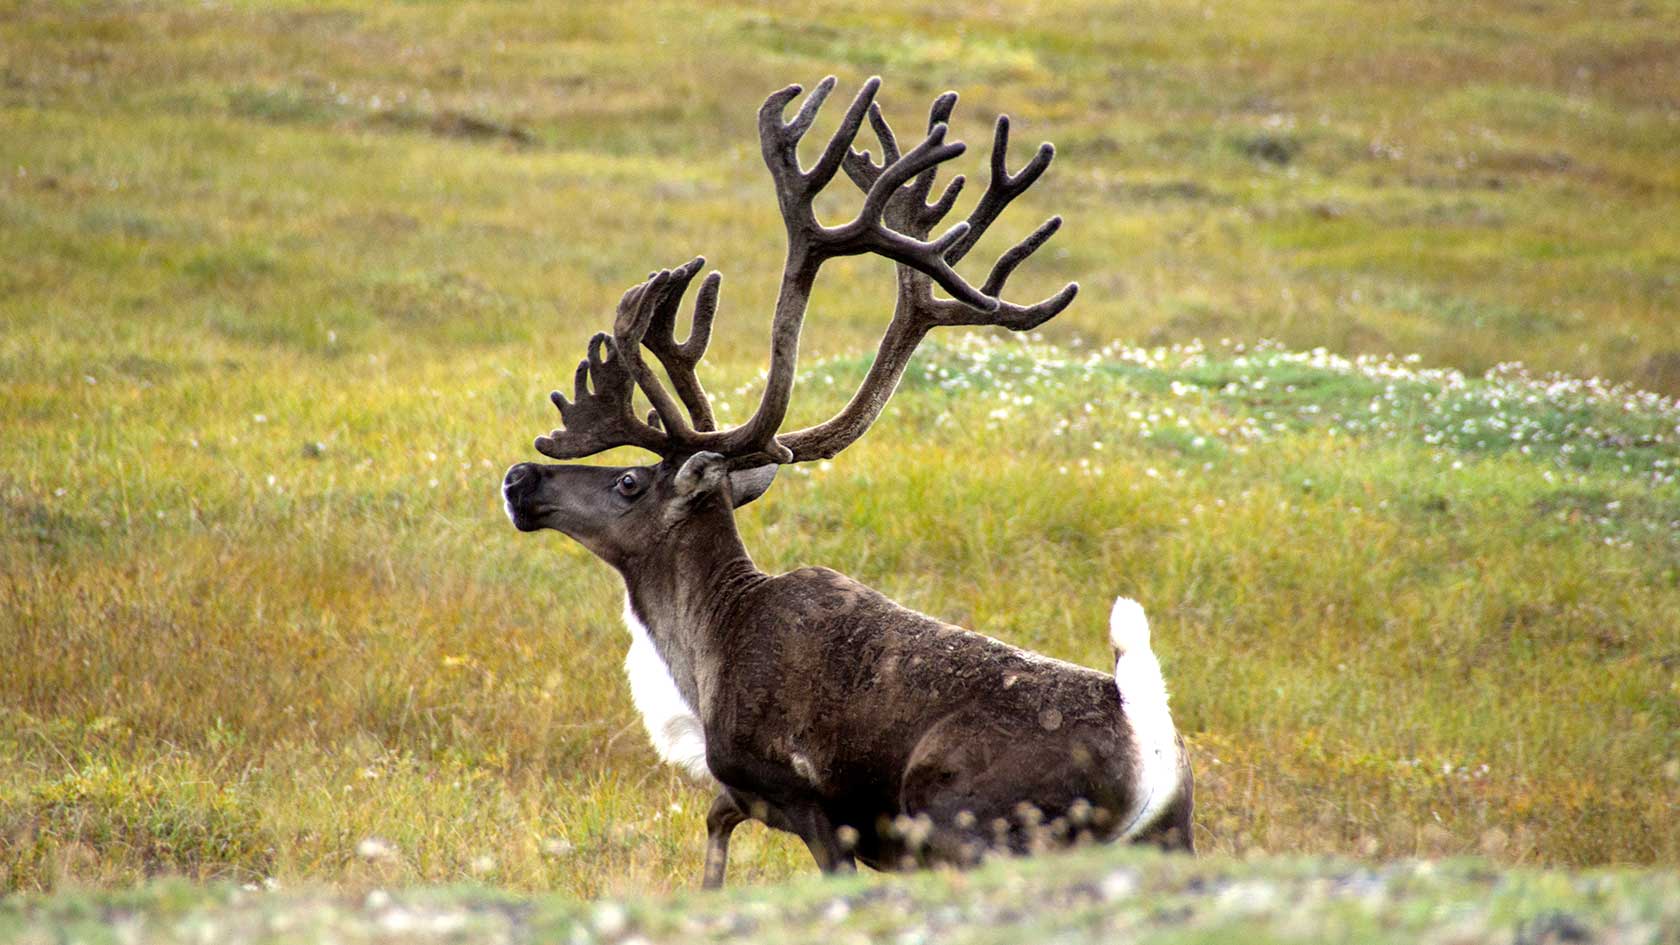 Bull caribou in Gates of the Arctic National Park